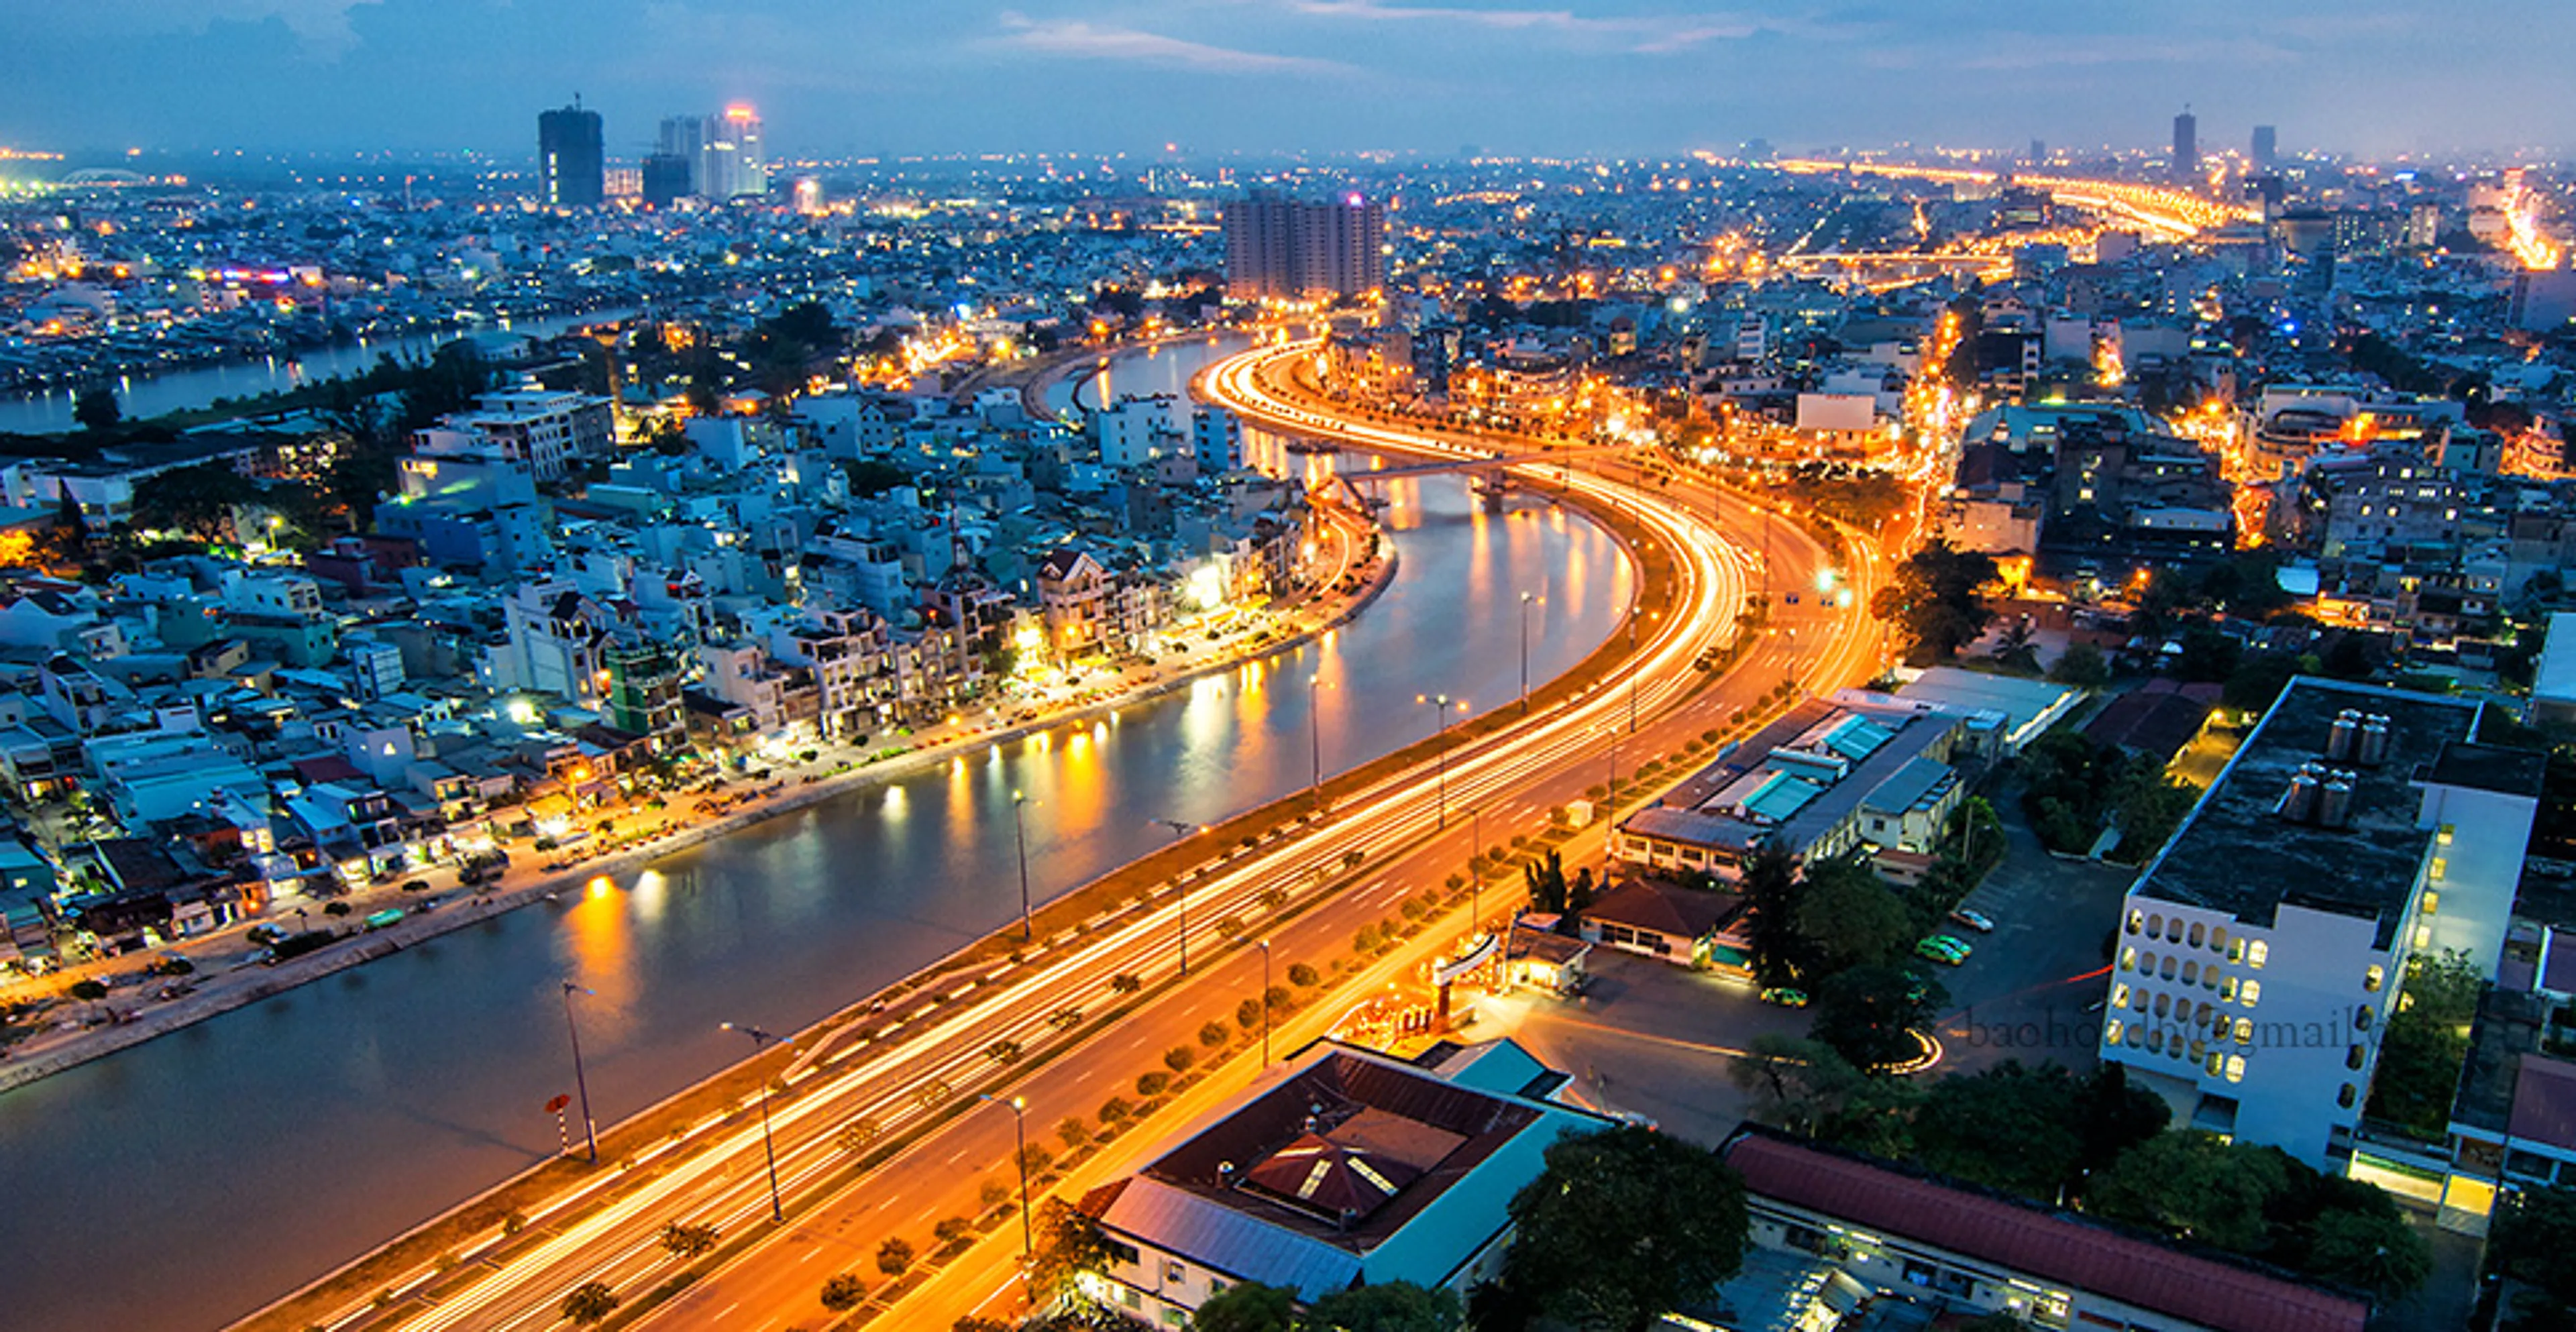  Discover 14 beautiful eye-catching photo spots in Saigon that cannot be missed